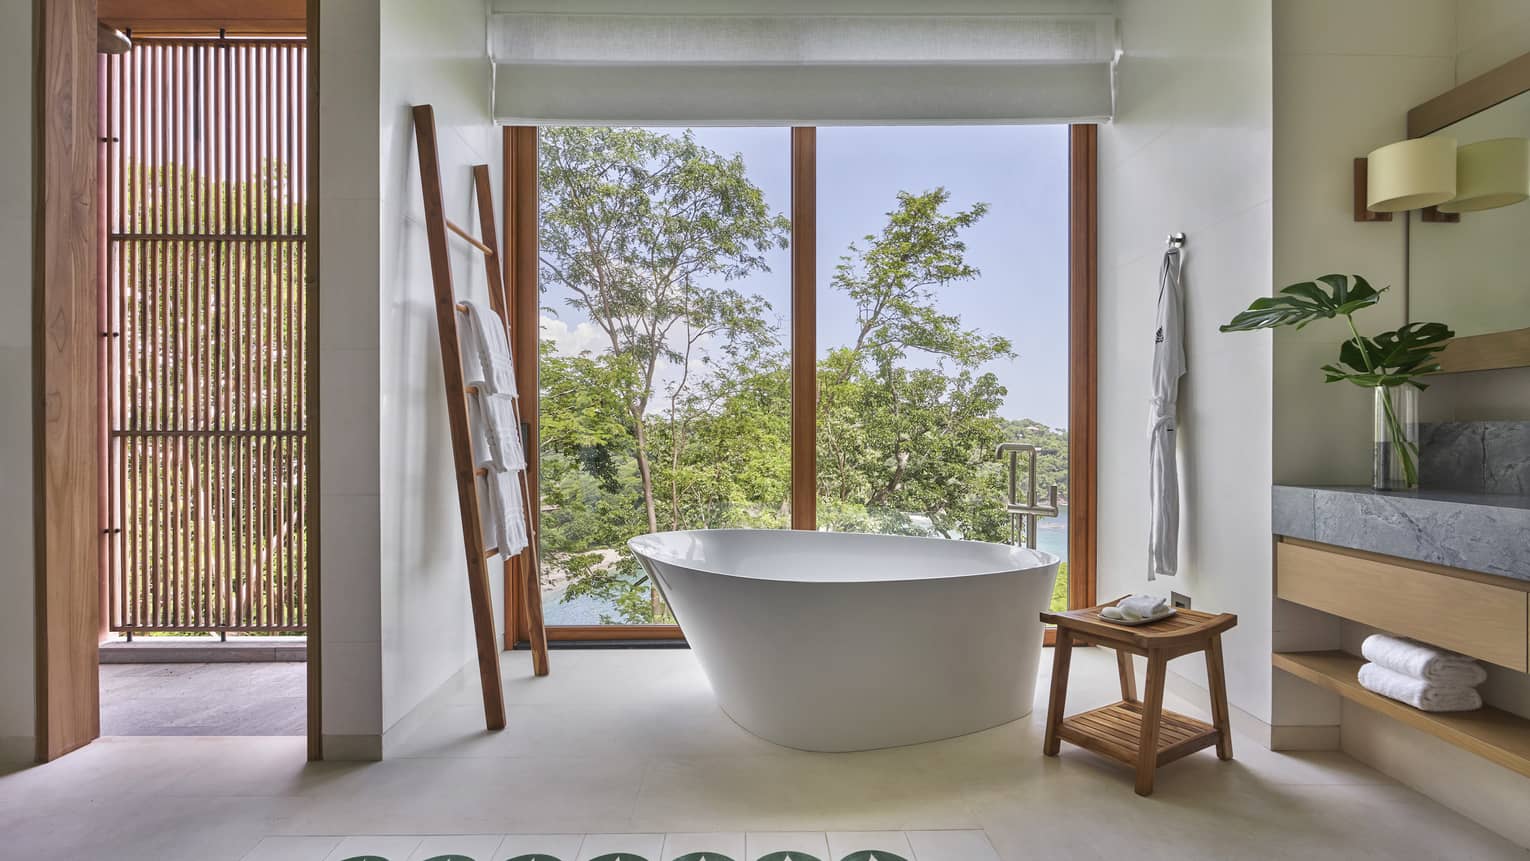 Bathroom with a free-standing tub by a wall of windows